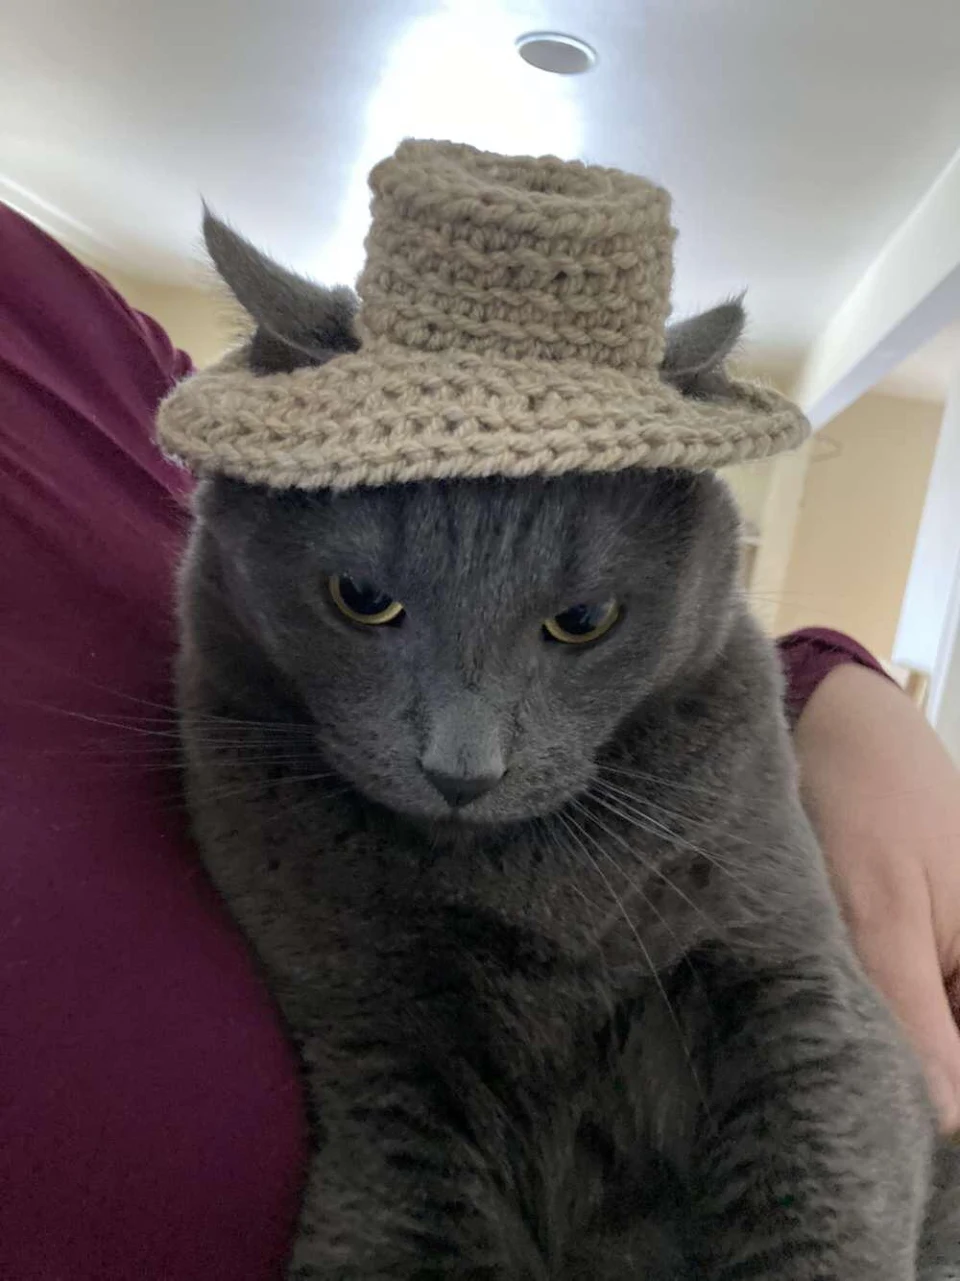 A crocheted hat on my cat!